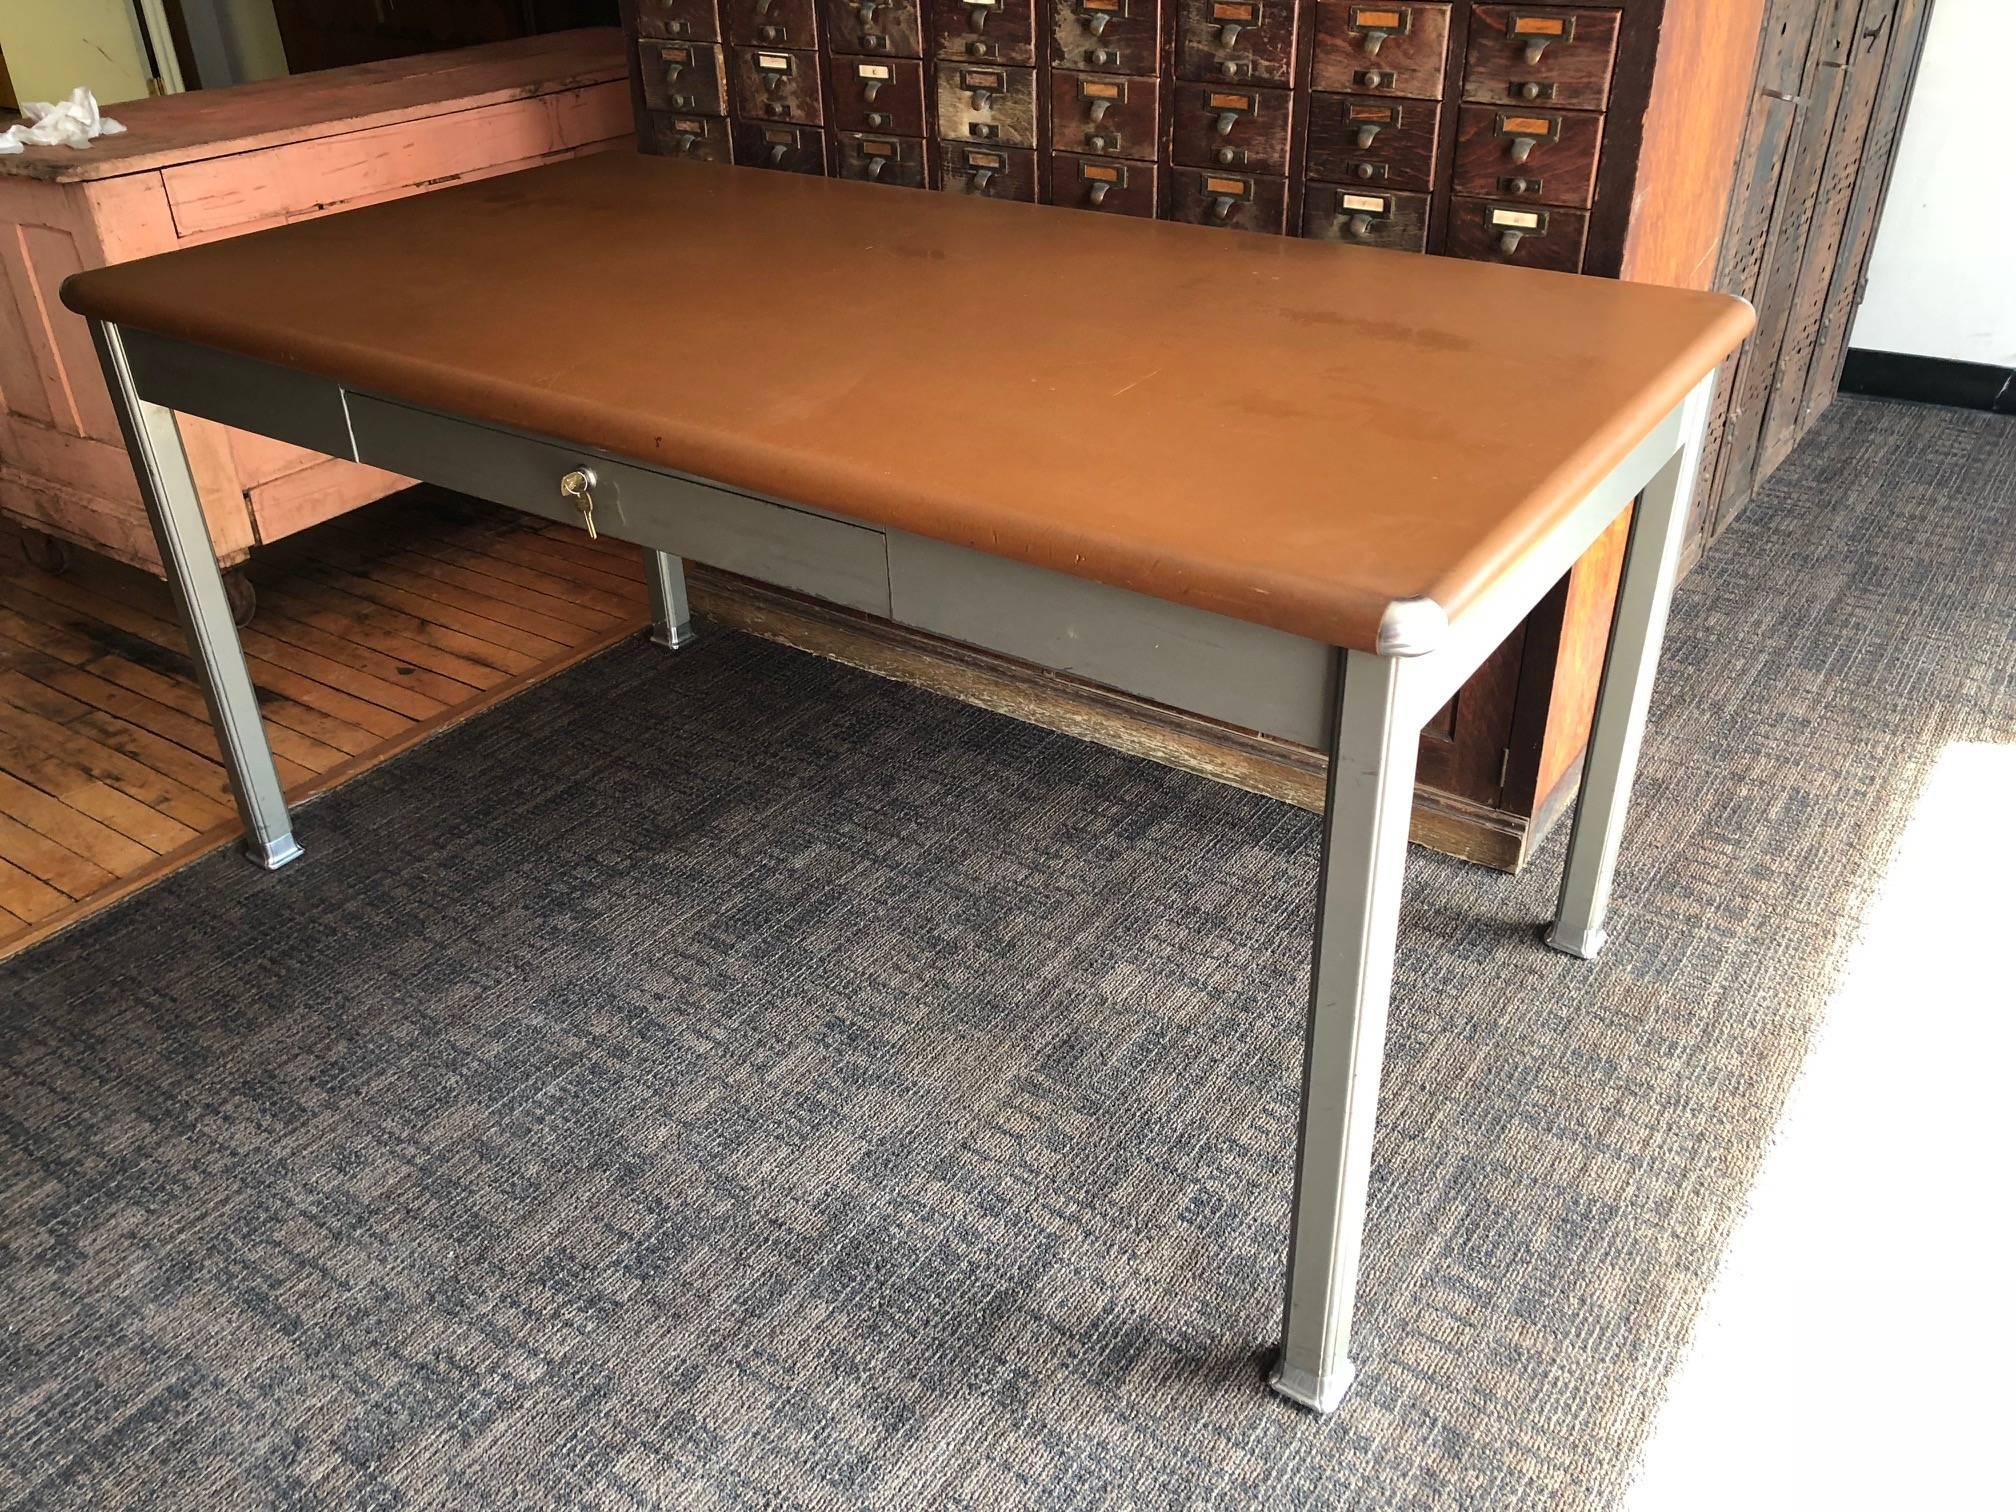 Midcentury Tanker desk with Linoleum top and steel corner bumpers. Minor reassembly of legs to desk top required to keep shipping costs down and assure safe delivery.